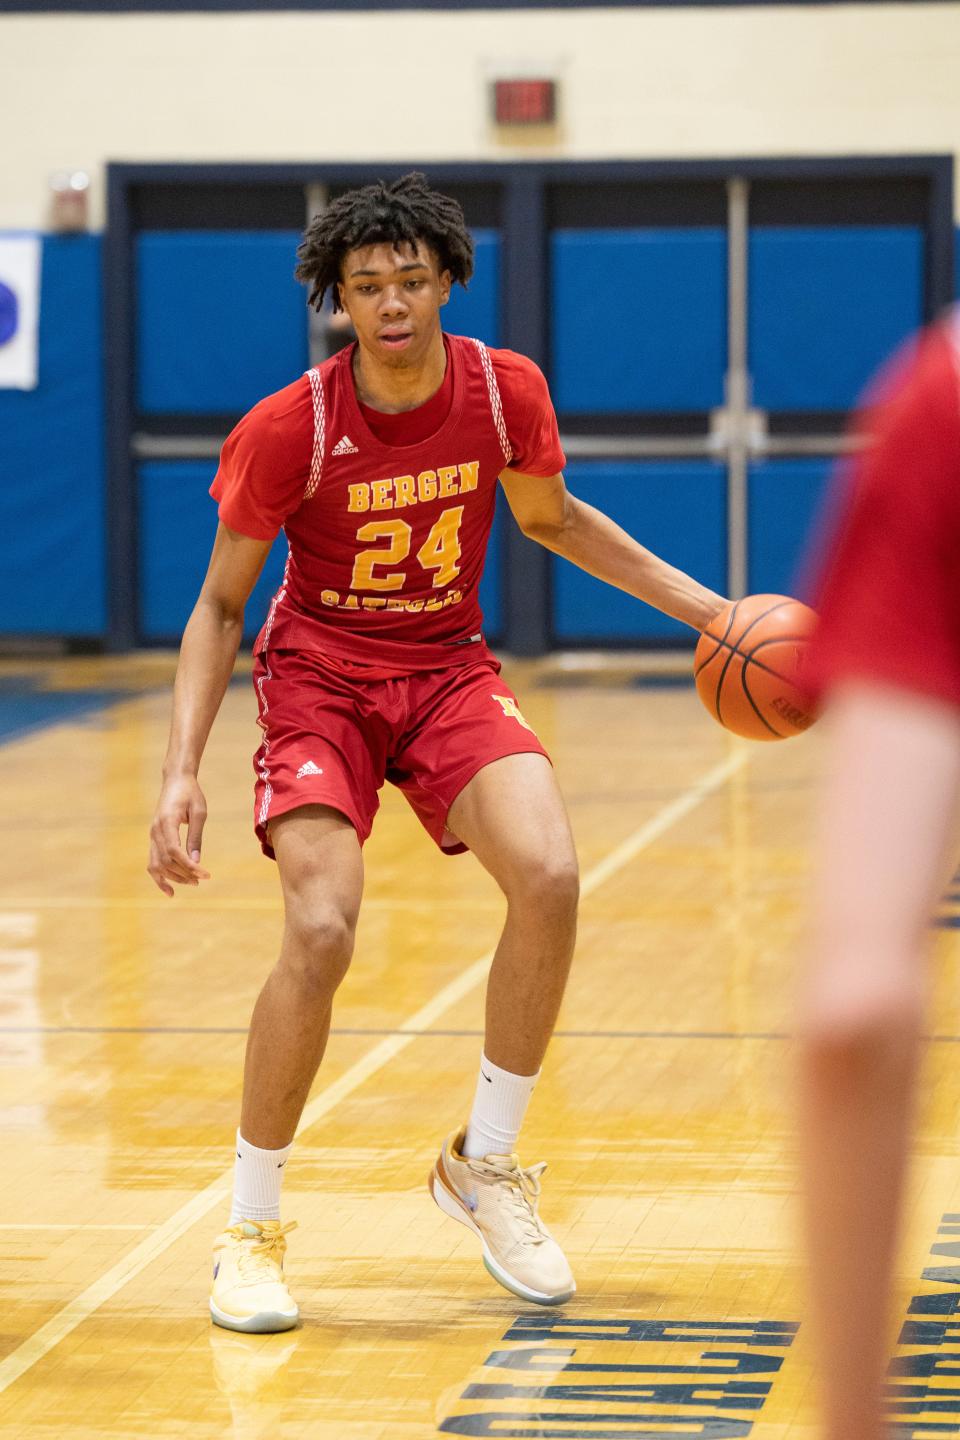 Julius Avent, shown earlier this month, scored 24 points to pace Bergen Catholic to a 79-58 win over Seton Hall Prep in a North Non-Public A boys basketball tournament first-round game.